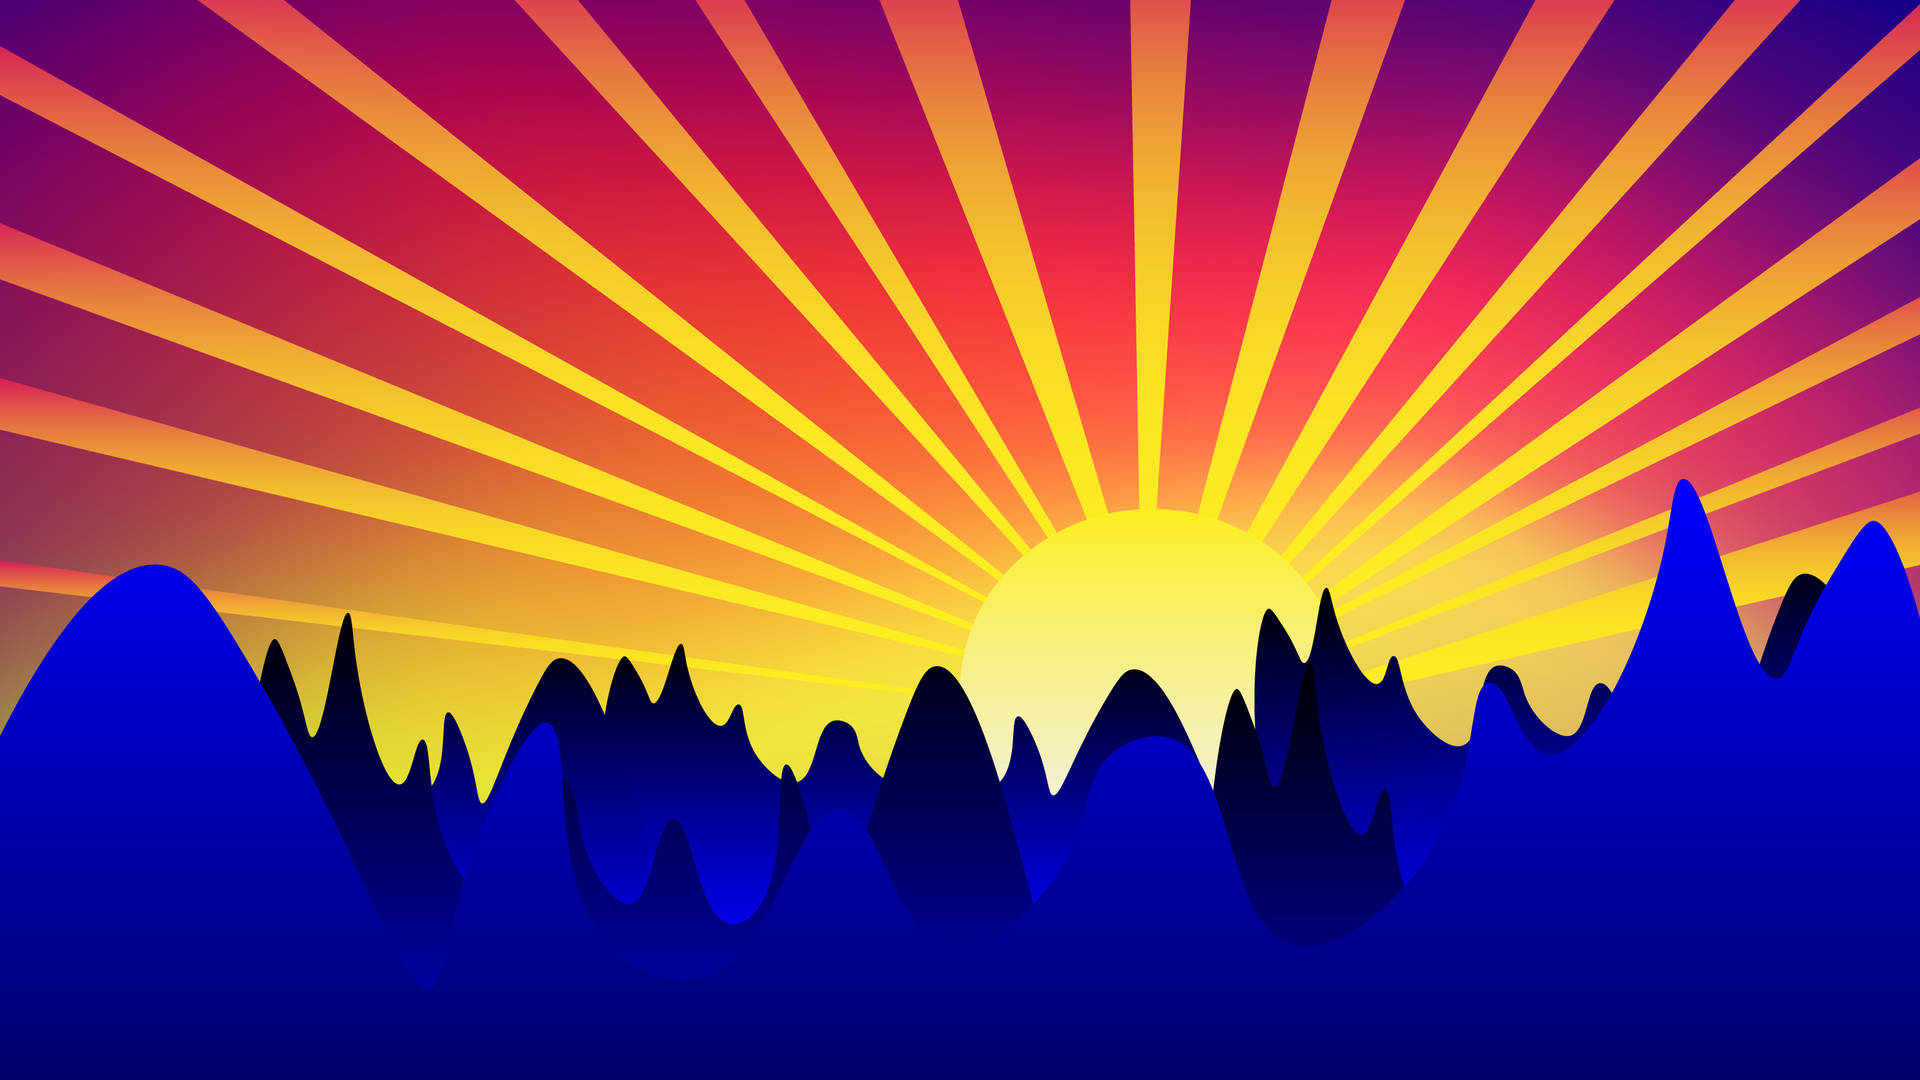 Watch in Awe as the Sun Rises over the Majestic Mountain Wallpaper